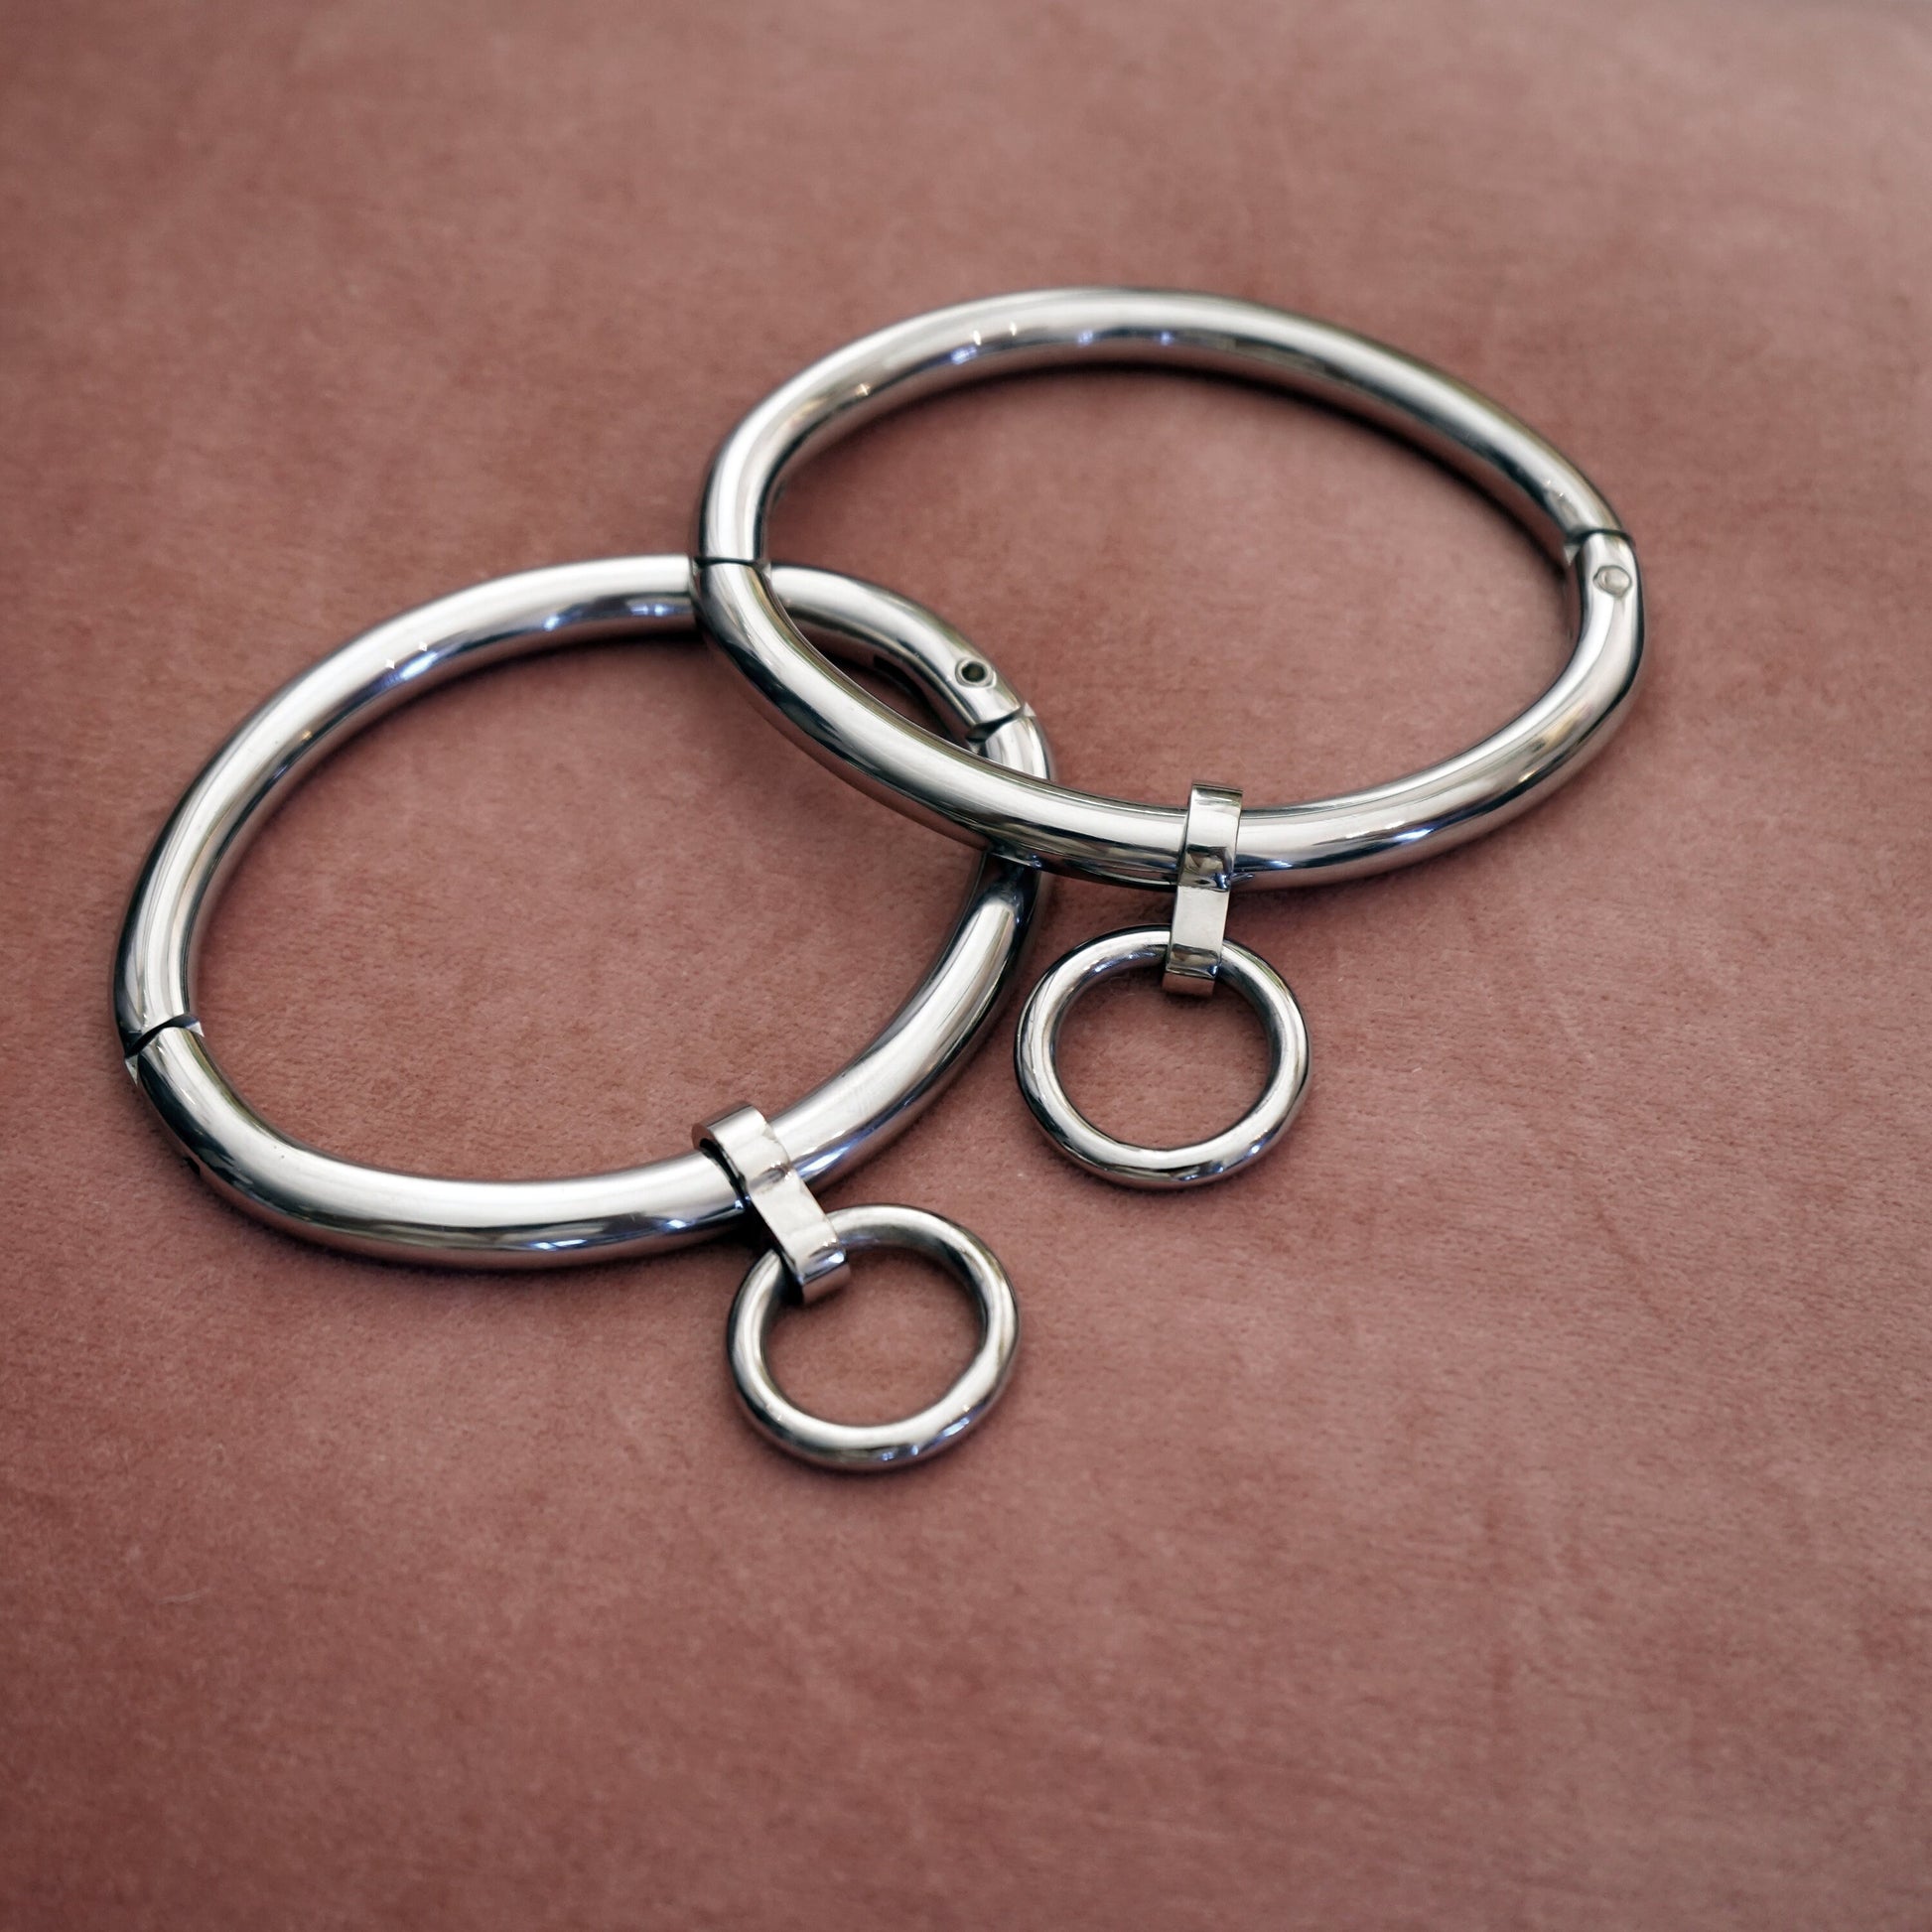 Massive stainless steel eternity anklets with rings